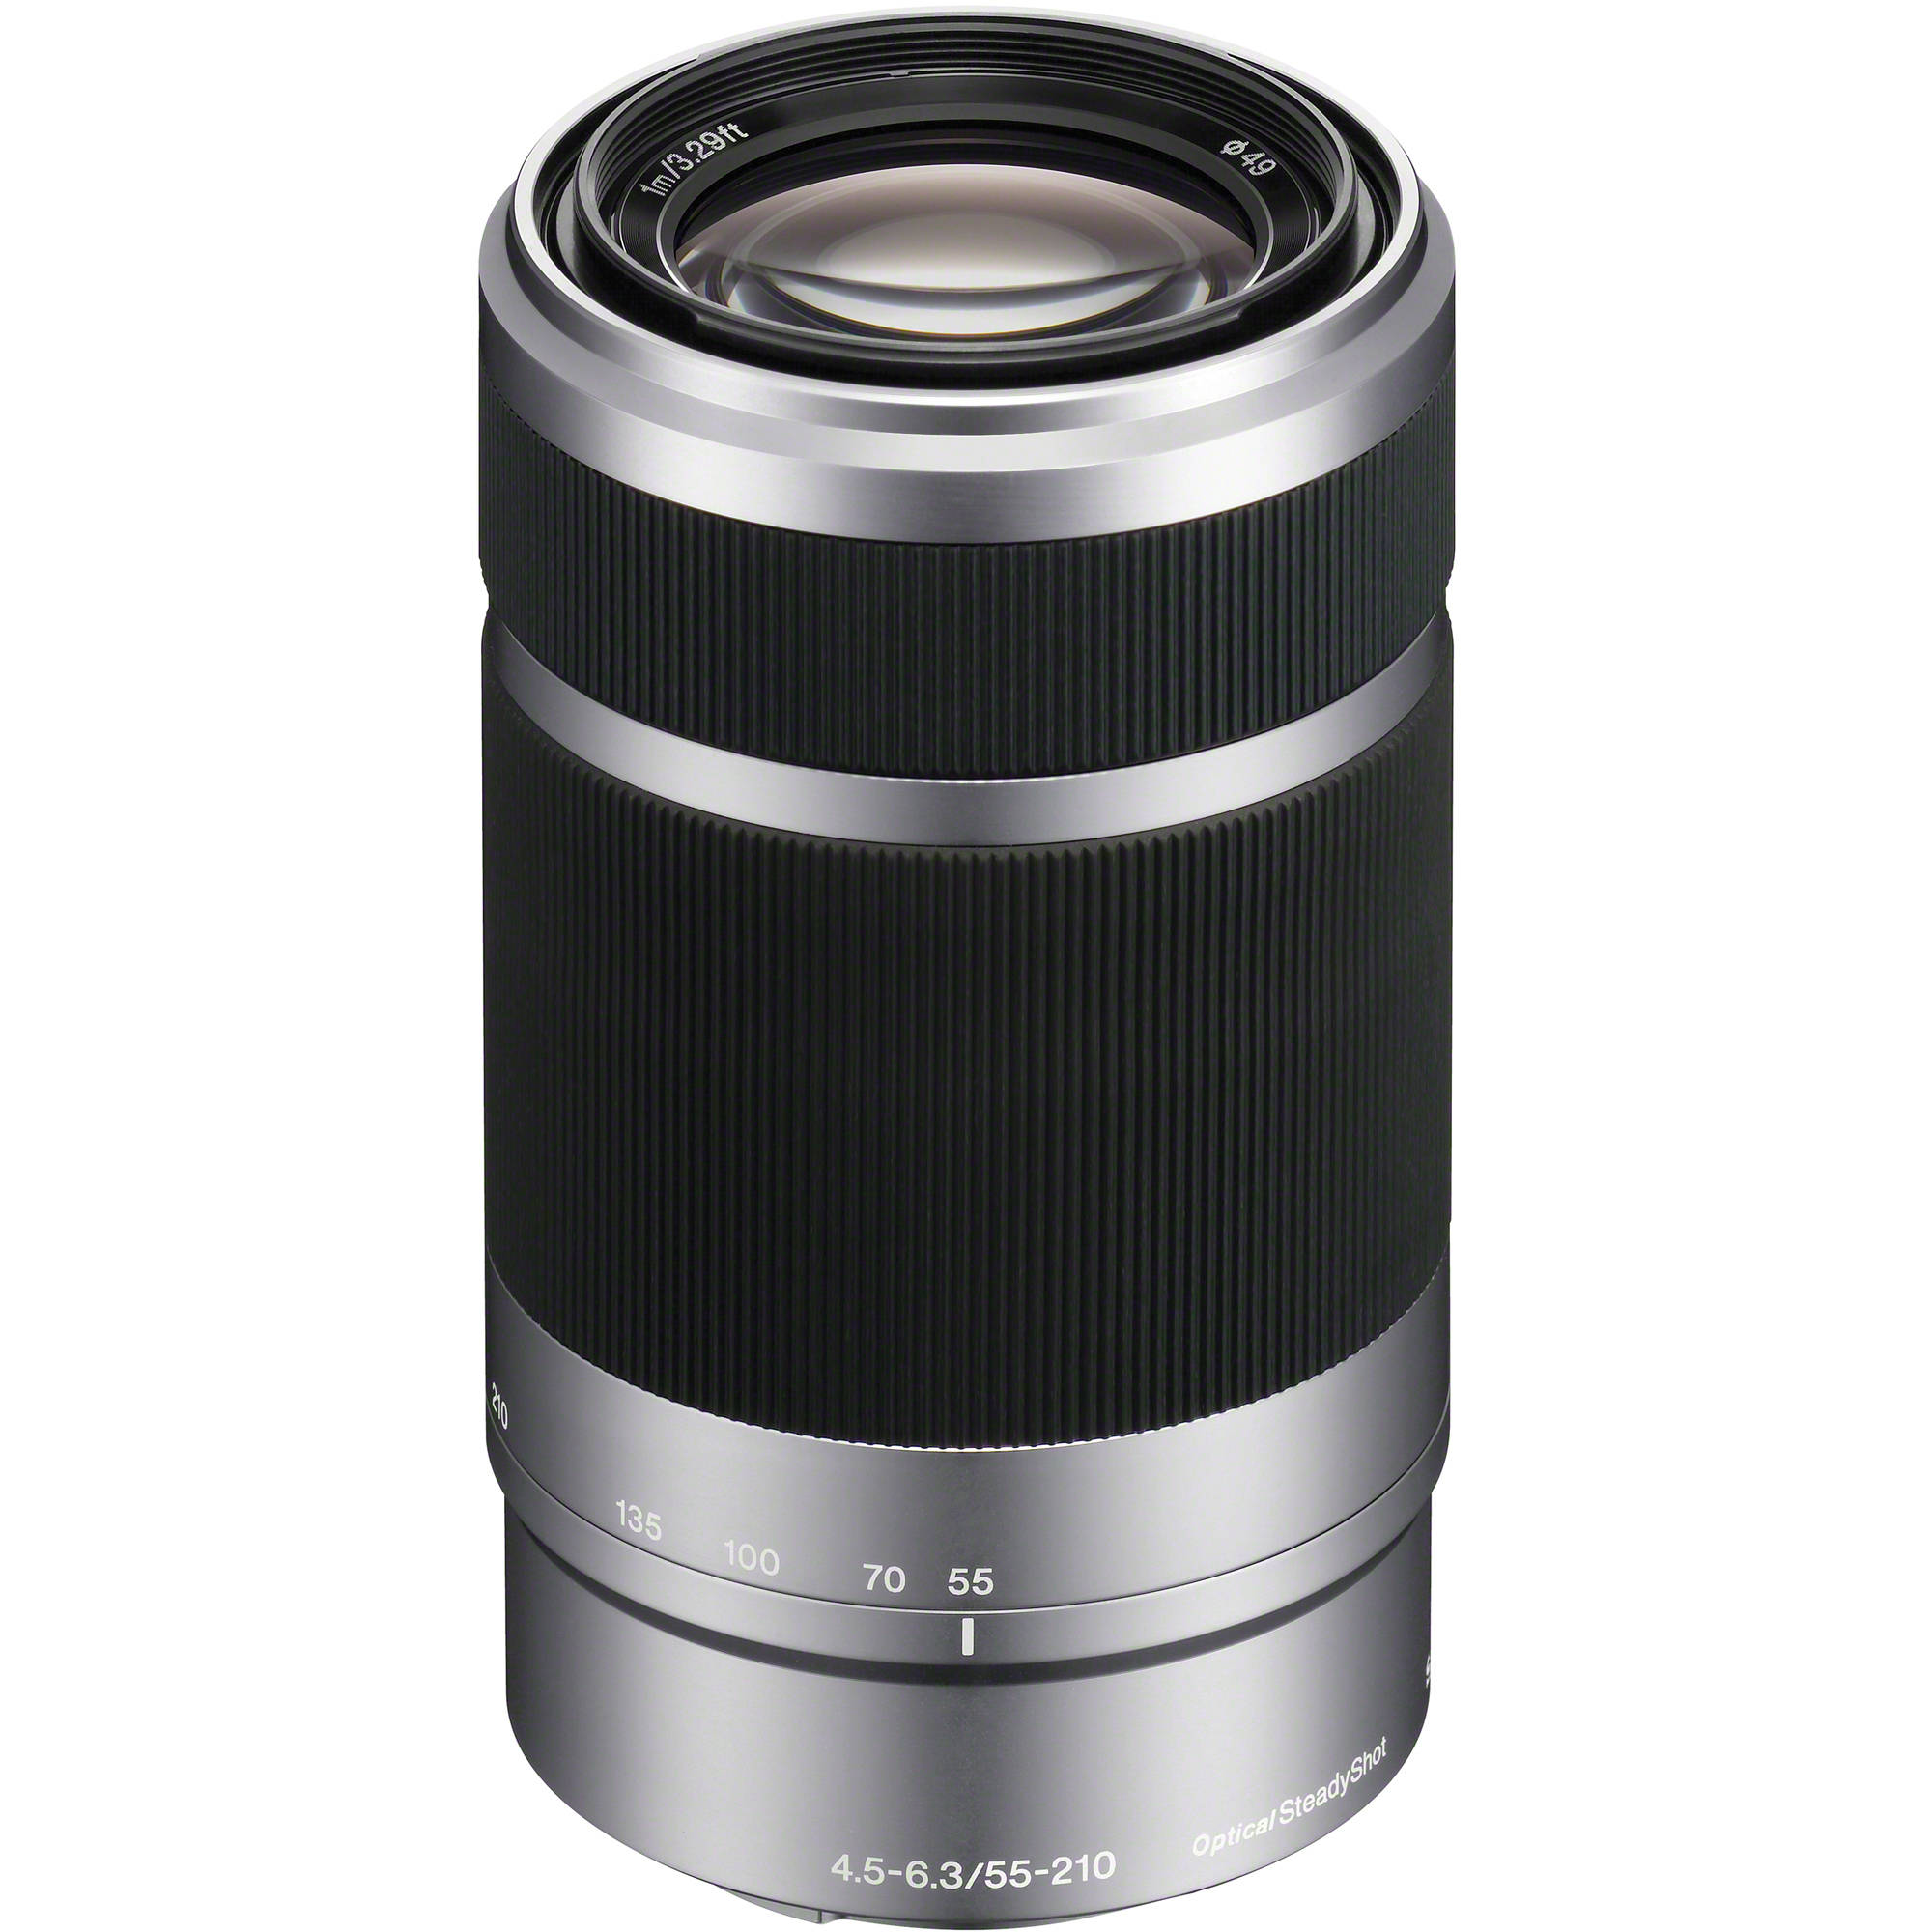 TThumbnail image for SONY E 55-210MM F/4.5 - 6.3 OSS  *A* silver